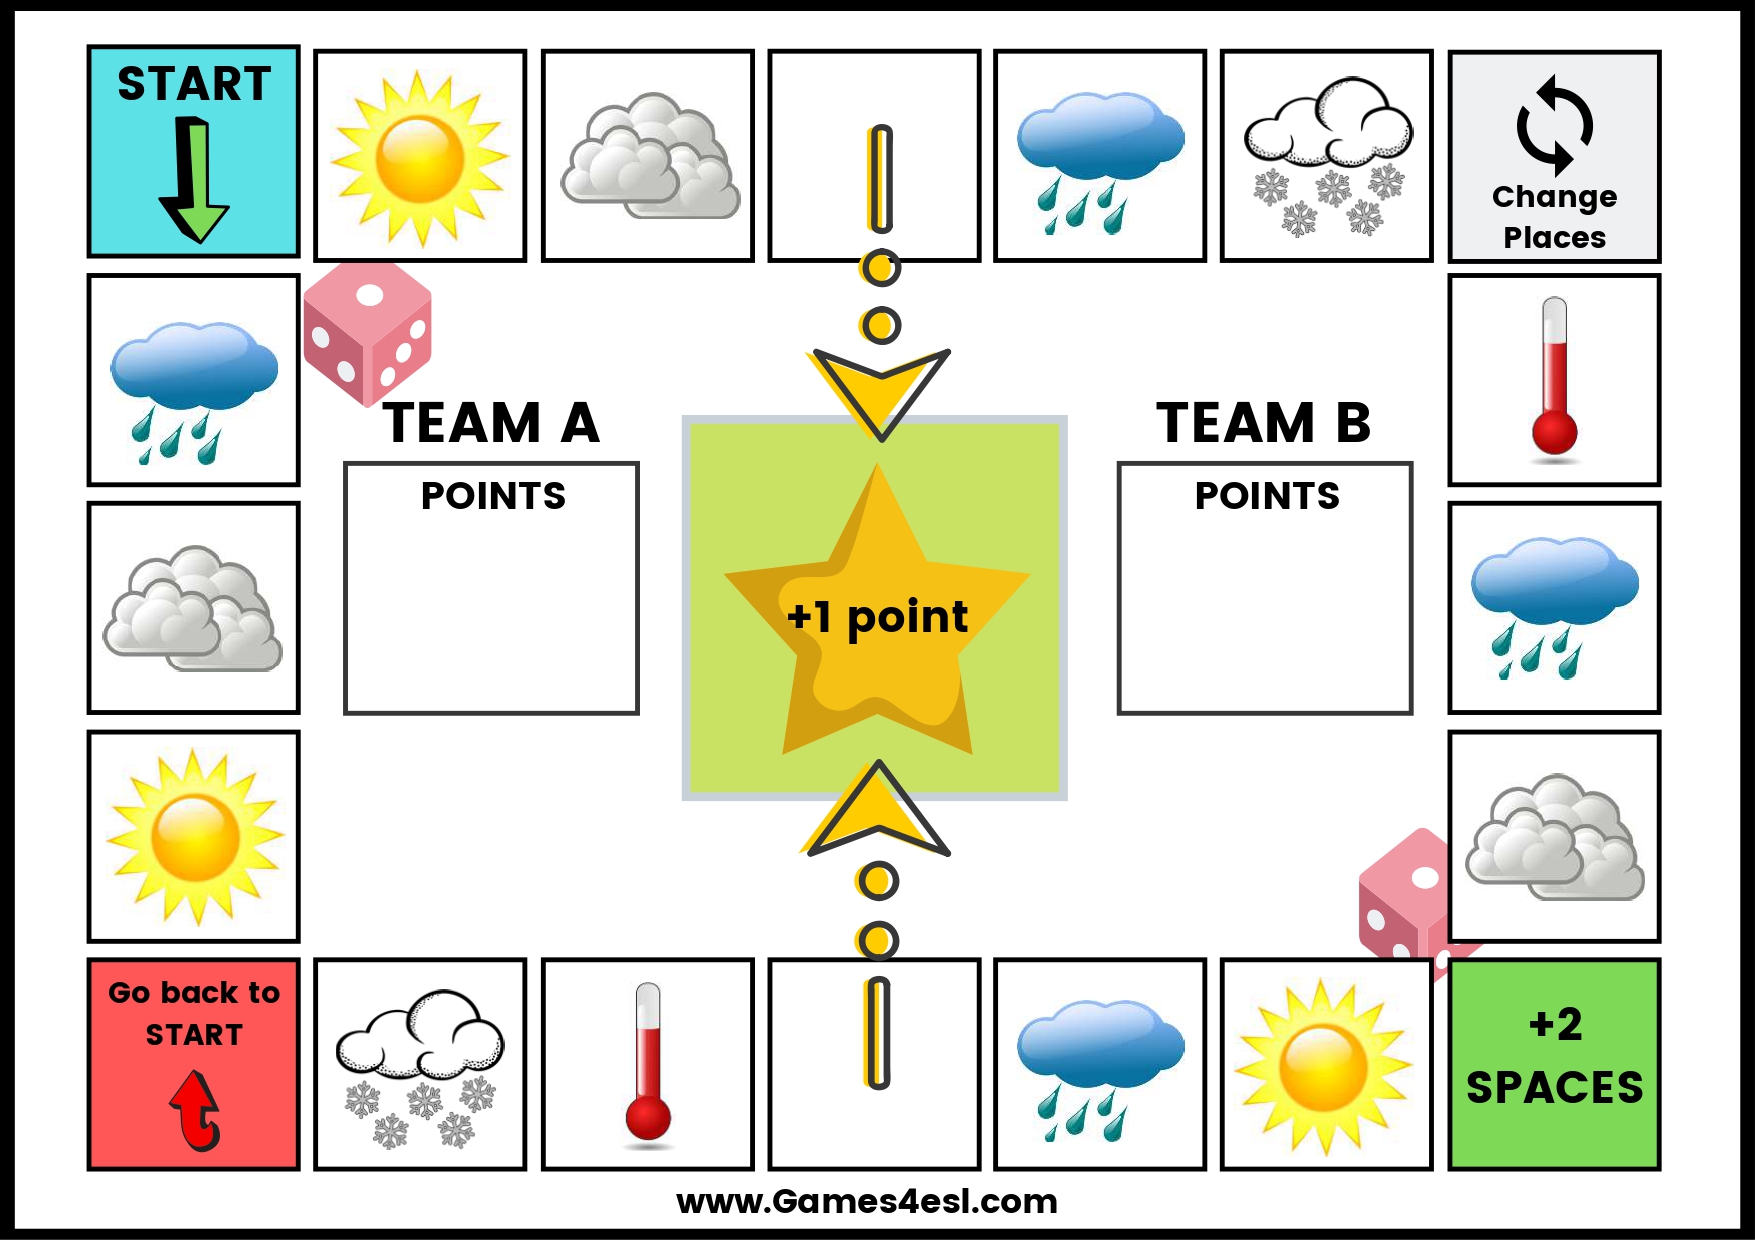 A printable board game for teaching weather vocabulary.